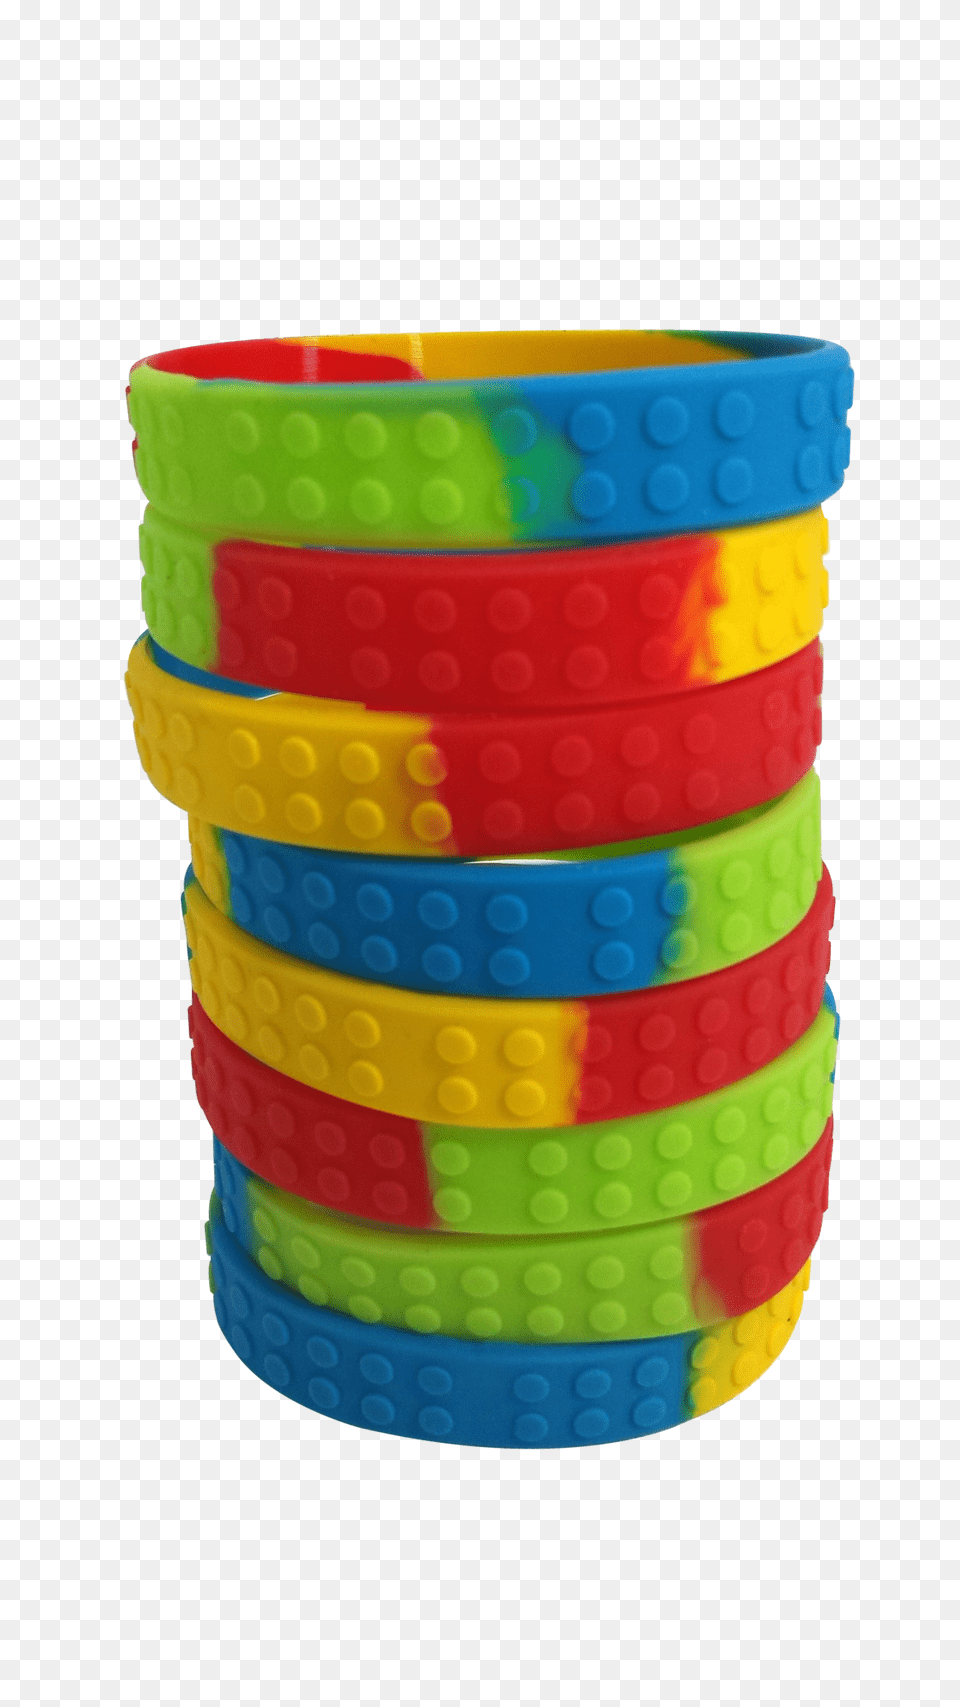 Brick Textured Wristbands For Lego Fans, Tape, Accessories Free Png Download